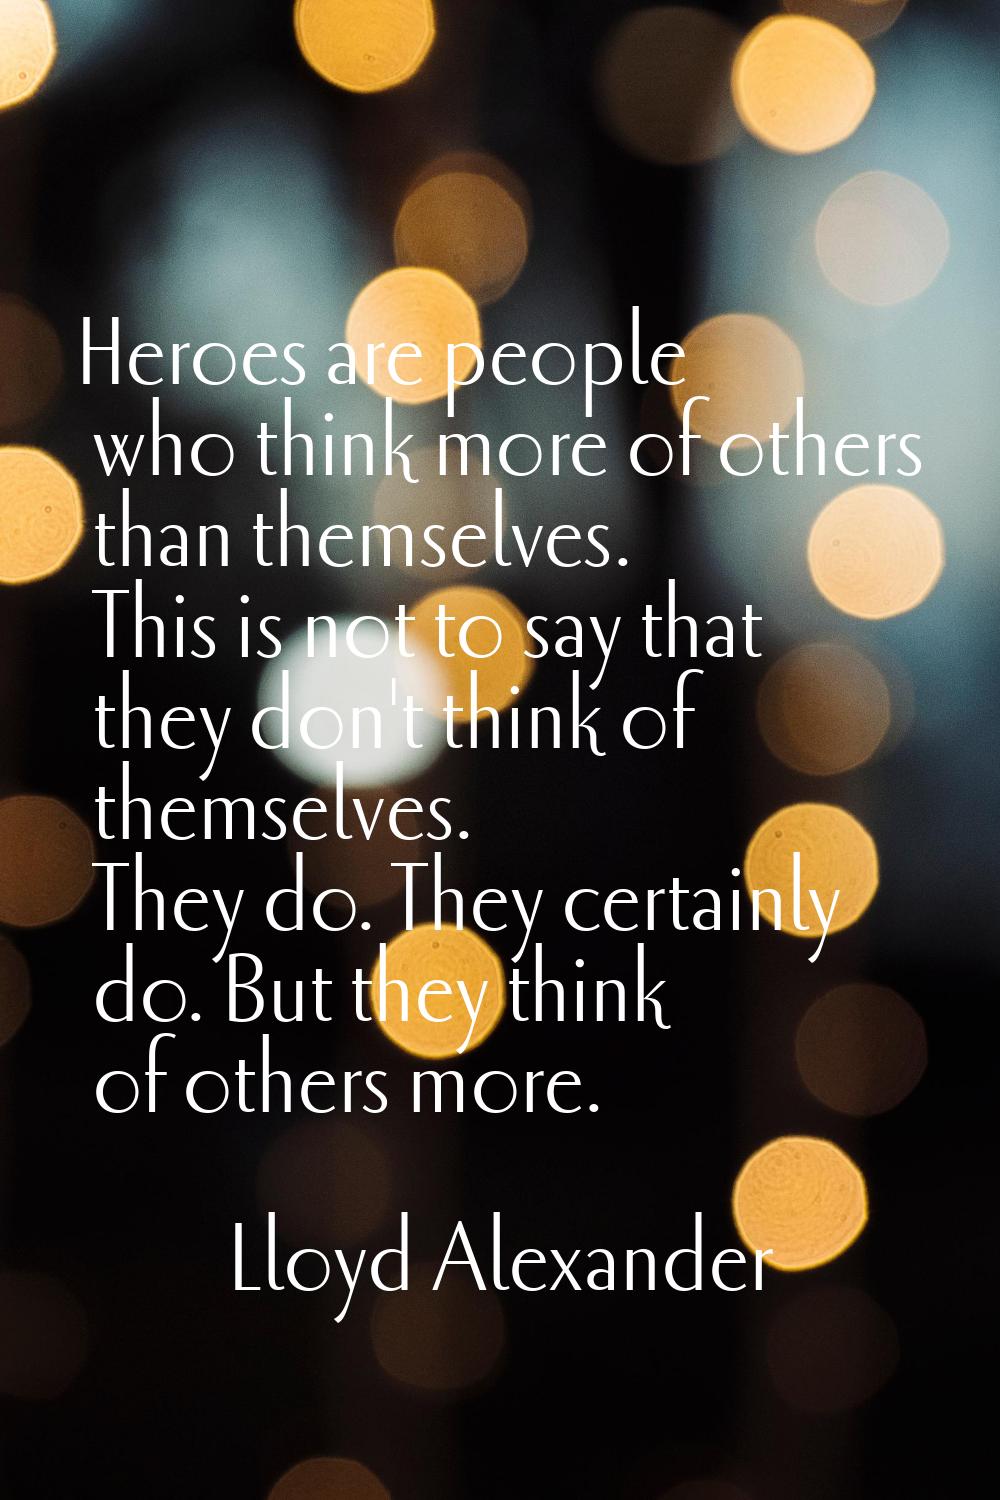 Heroes are people who think more of others than themselves. This is not to say that they don't thin